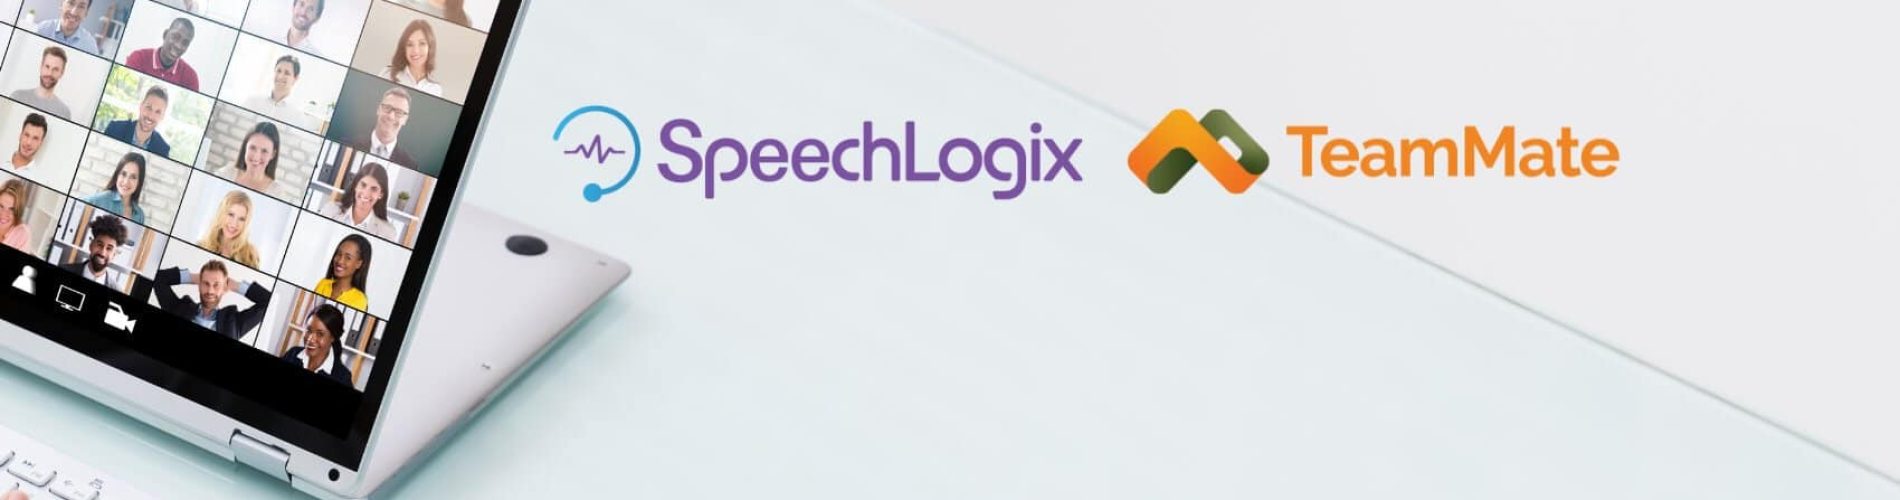 SpeechLogix & TeamMate enables operators extend carrier services with MS Teams.